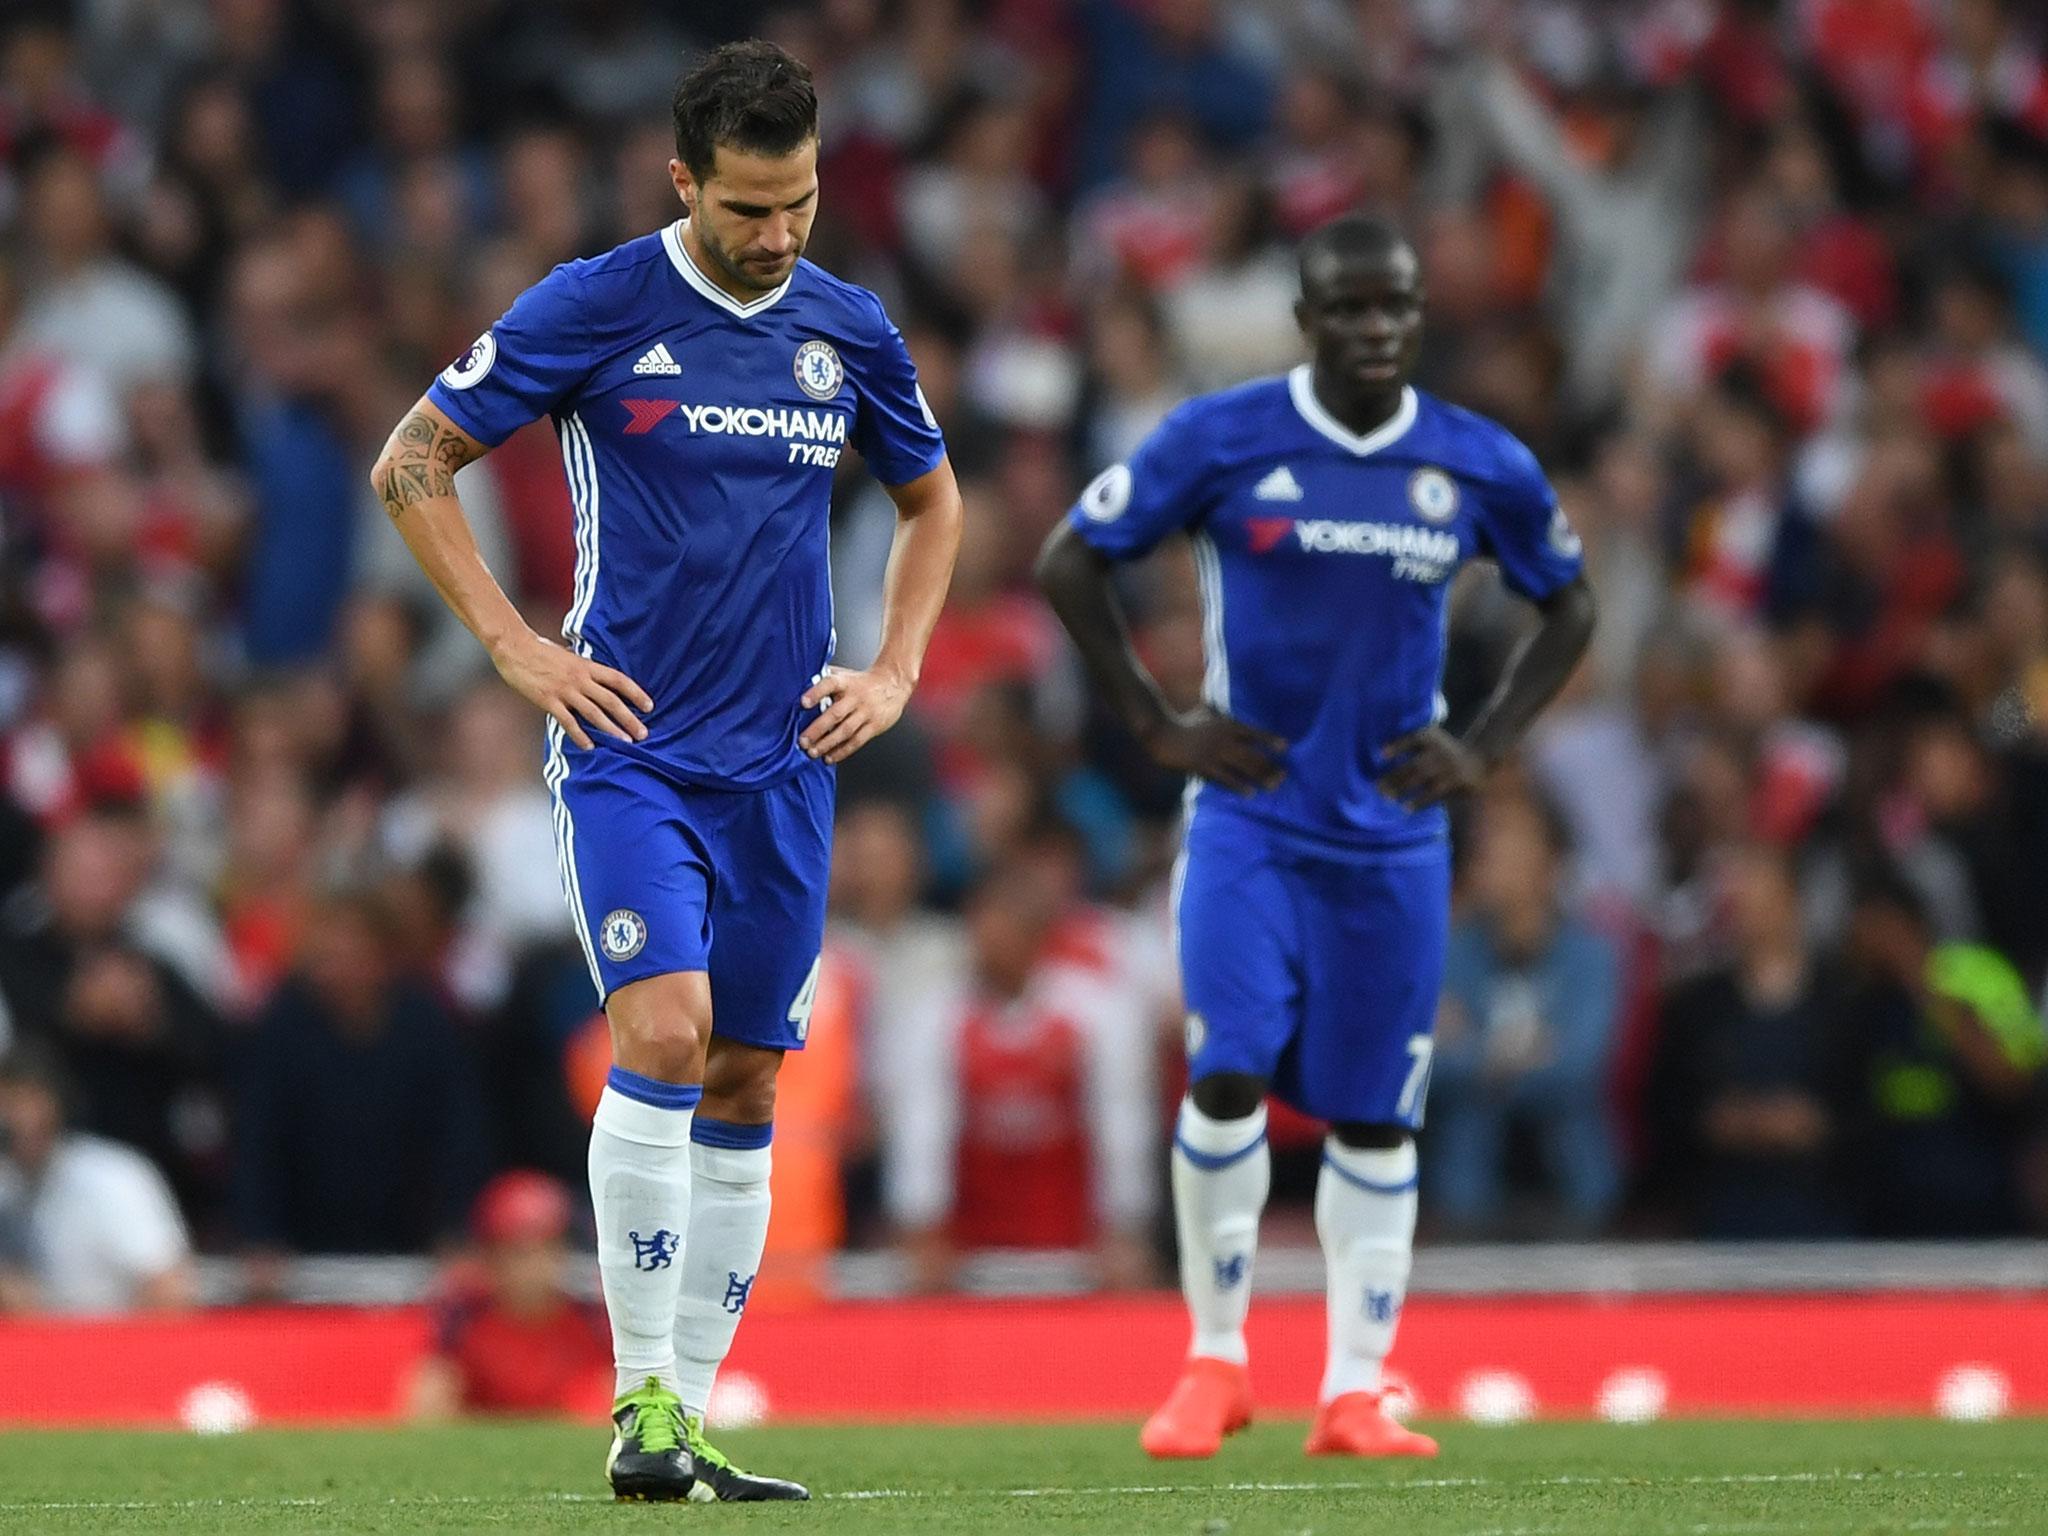 Chelsea changed their system after losing at Arsenal and never looked back